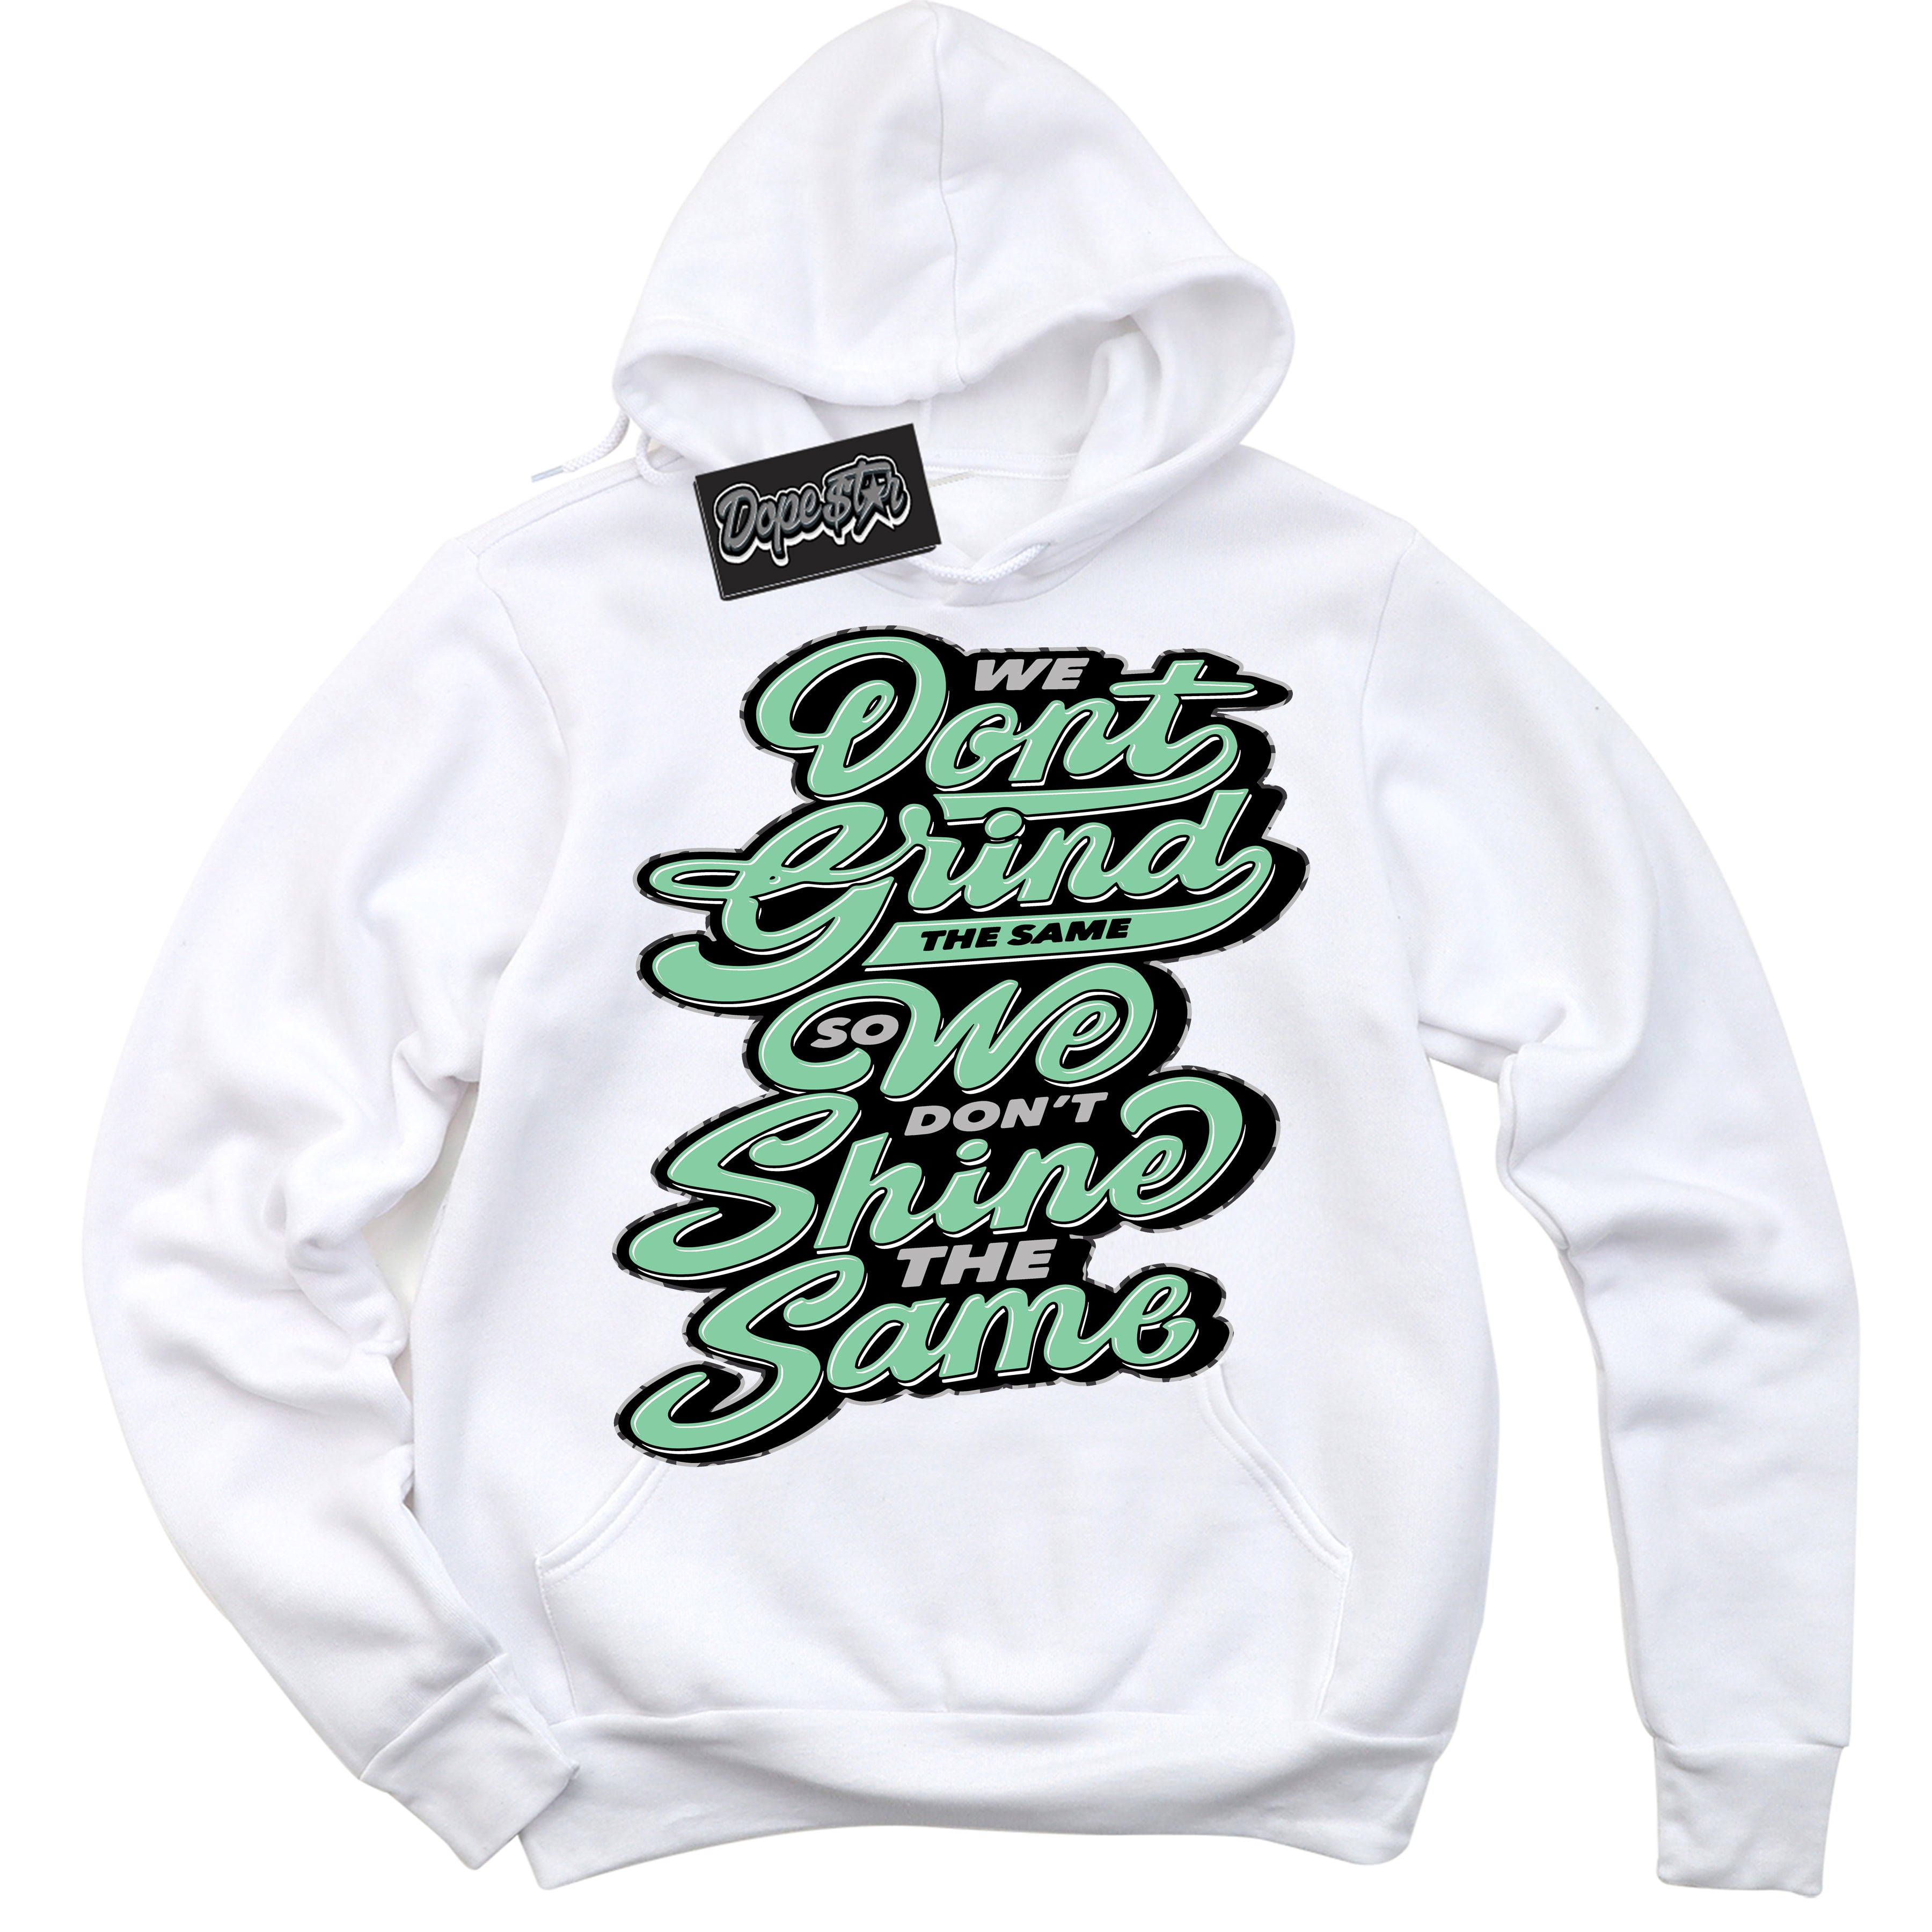 Cool White Graphic DopeStar Hoodie with “ Grind Shine “ print, that perfectly matches Green Glow 3s sneakers